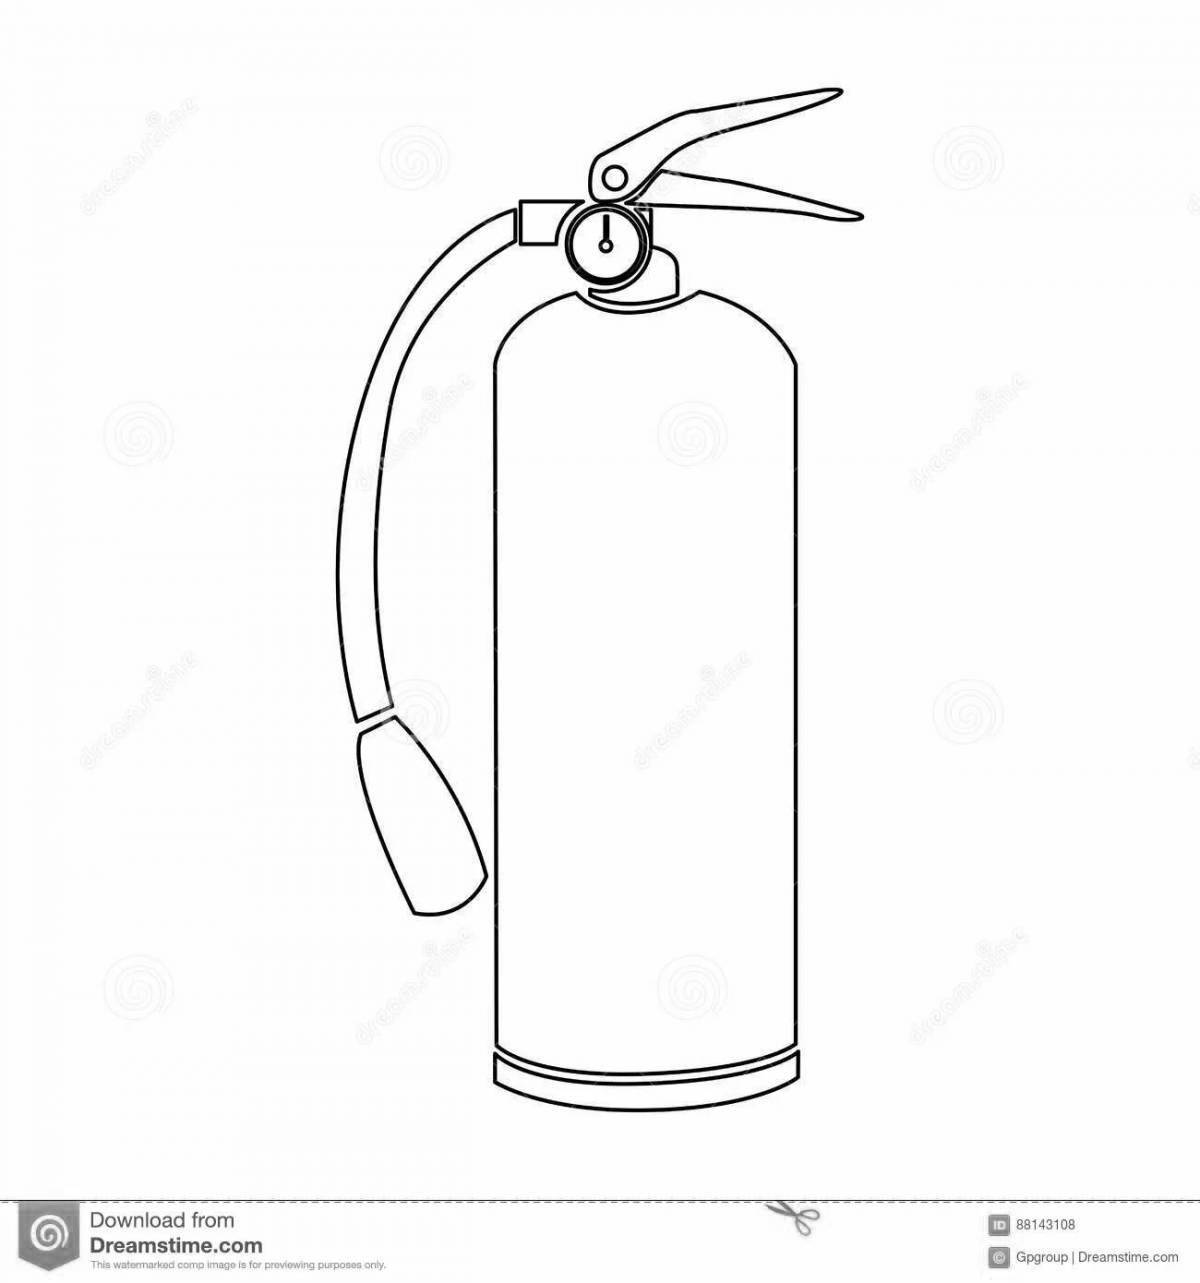 Playful fire extinguisher coloring page for babies